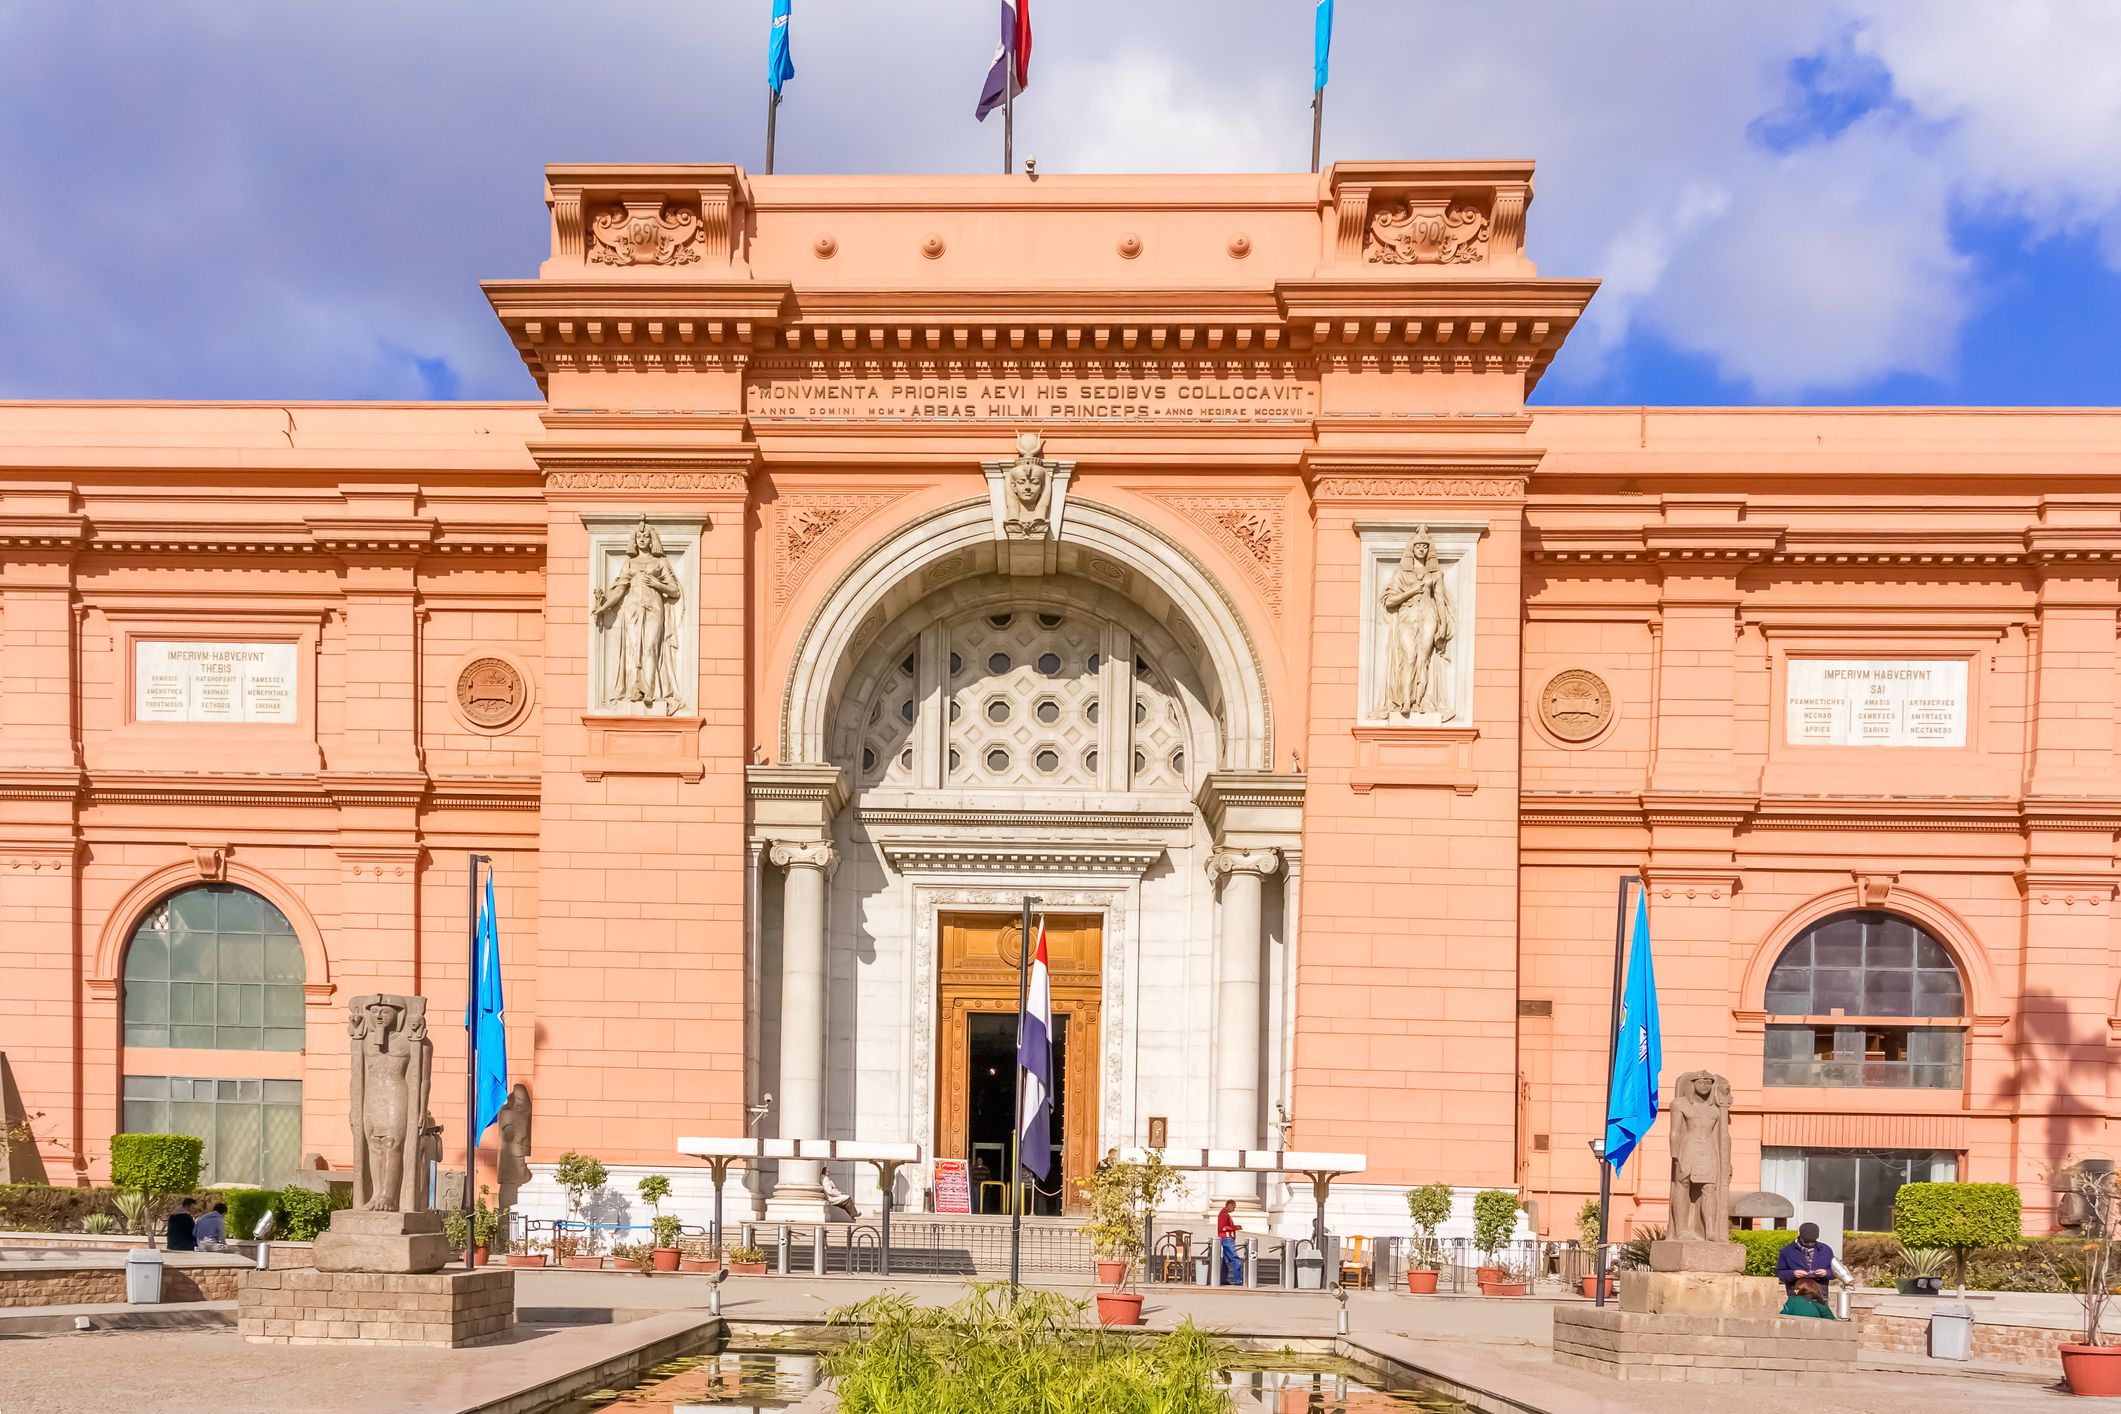 <p>Cairo is home to The Egypt Museum, pictured here. Later this year, The Grand Egyptian Museum will also open in Giza. Made of glass and concrete, this museum is 10 years in the making. It’ll be home to over 100,000 artifacts, making it the world’ largest archaeological museum. </p>